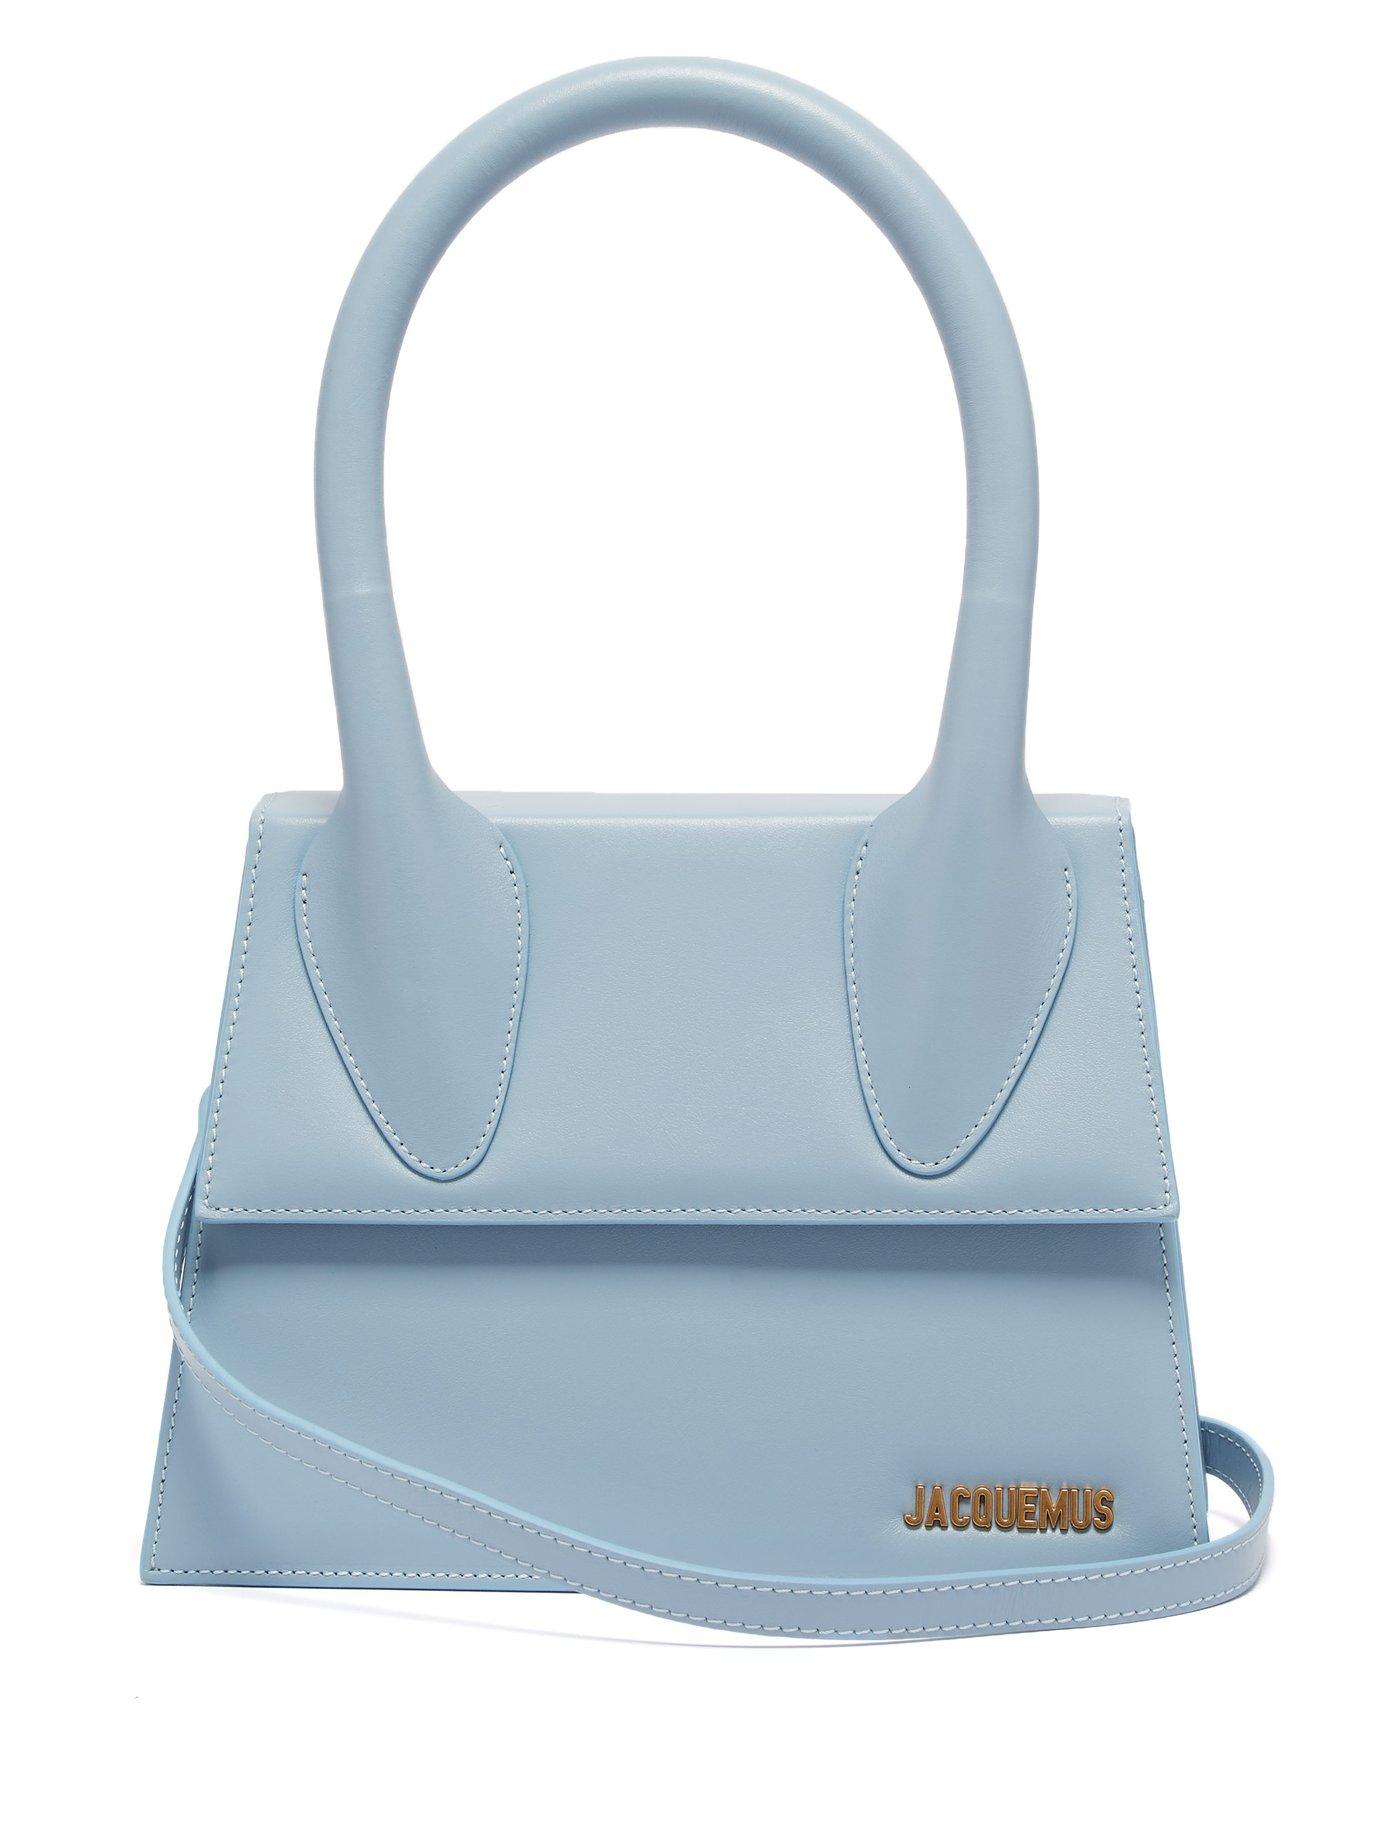 Jacquemus Le Grand Chiquito Leather Bag in Blue - Lyst